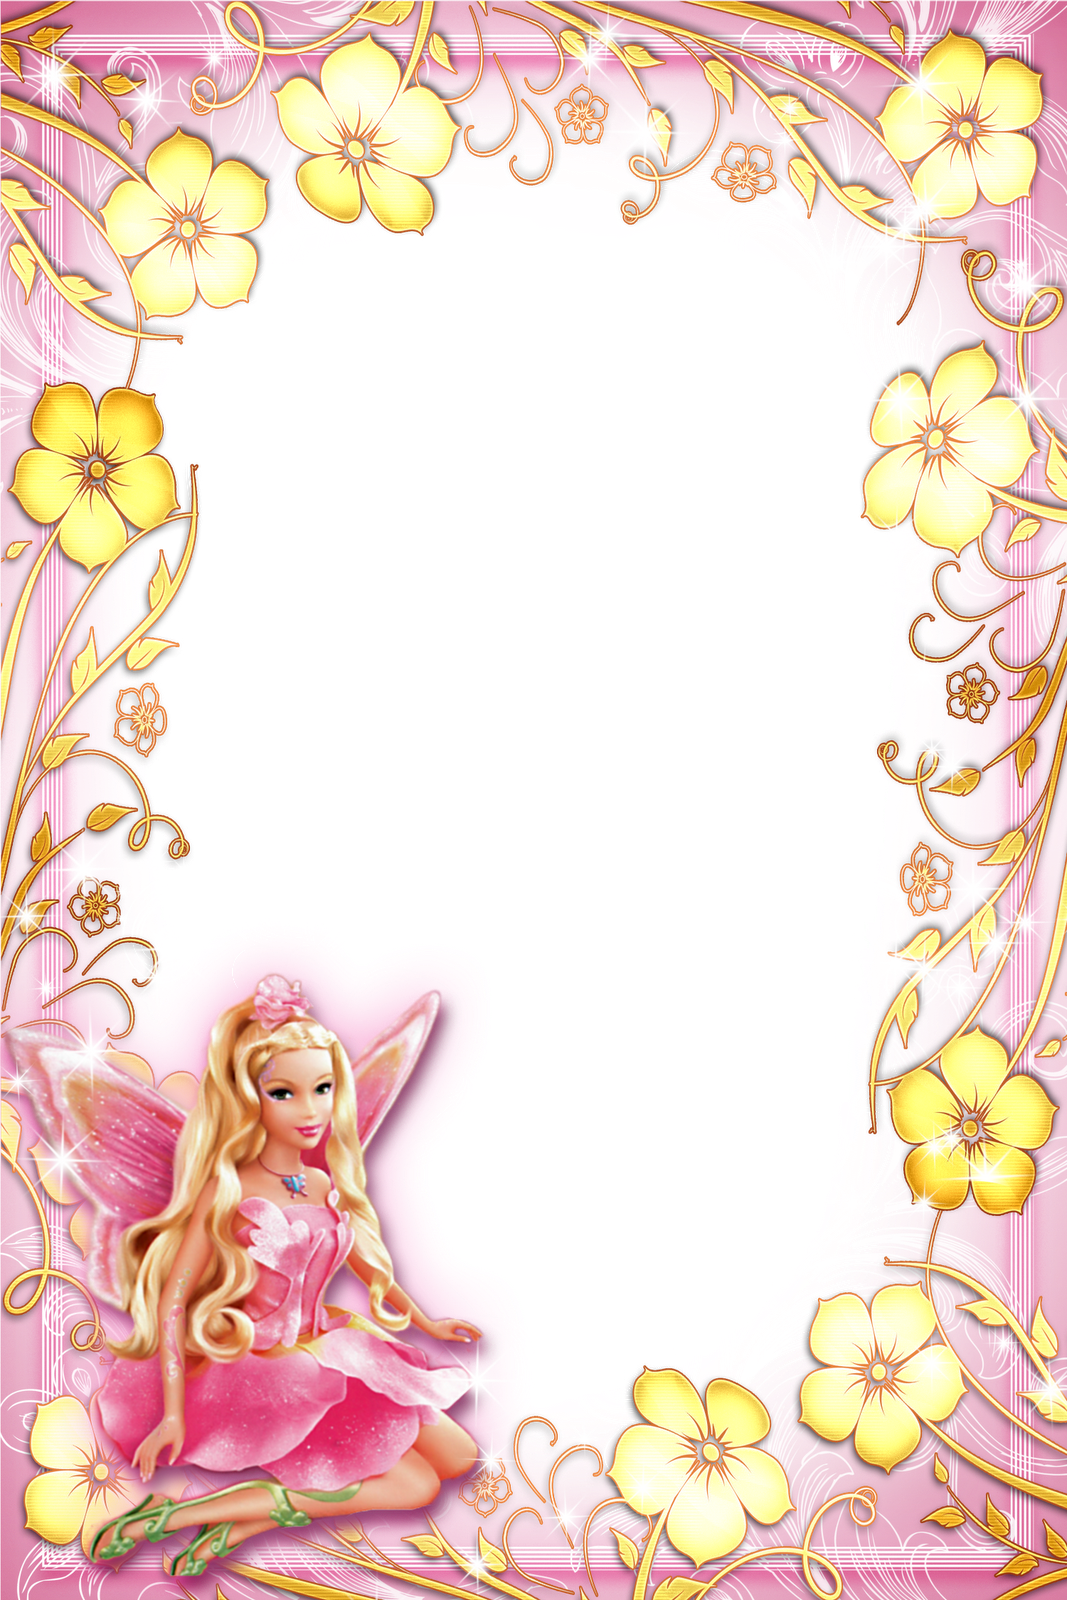 Barbie Frames Wallpapers High Quality | Download Free